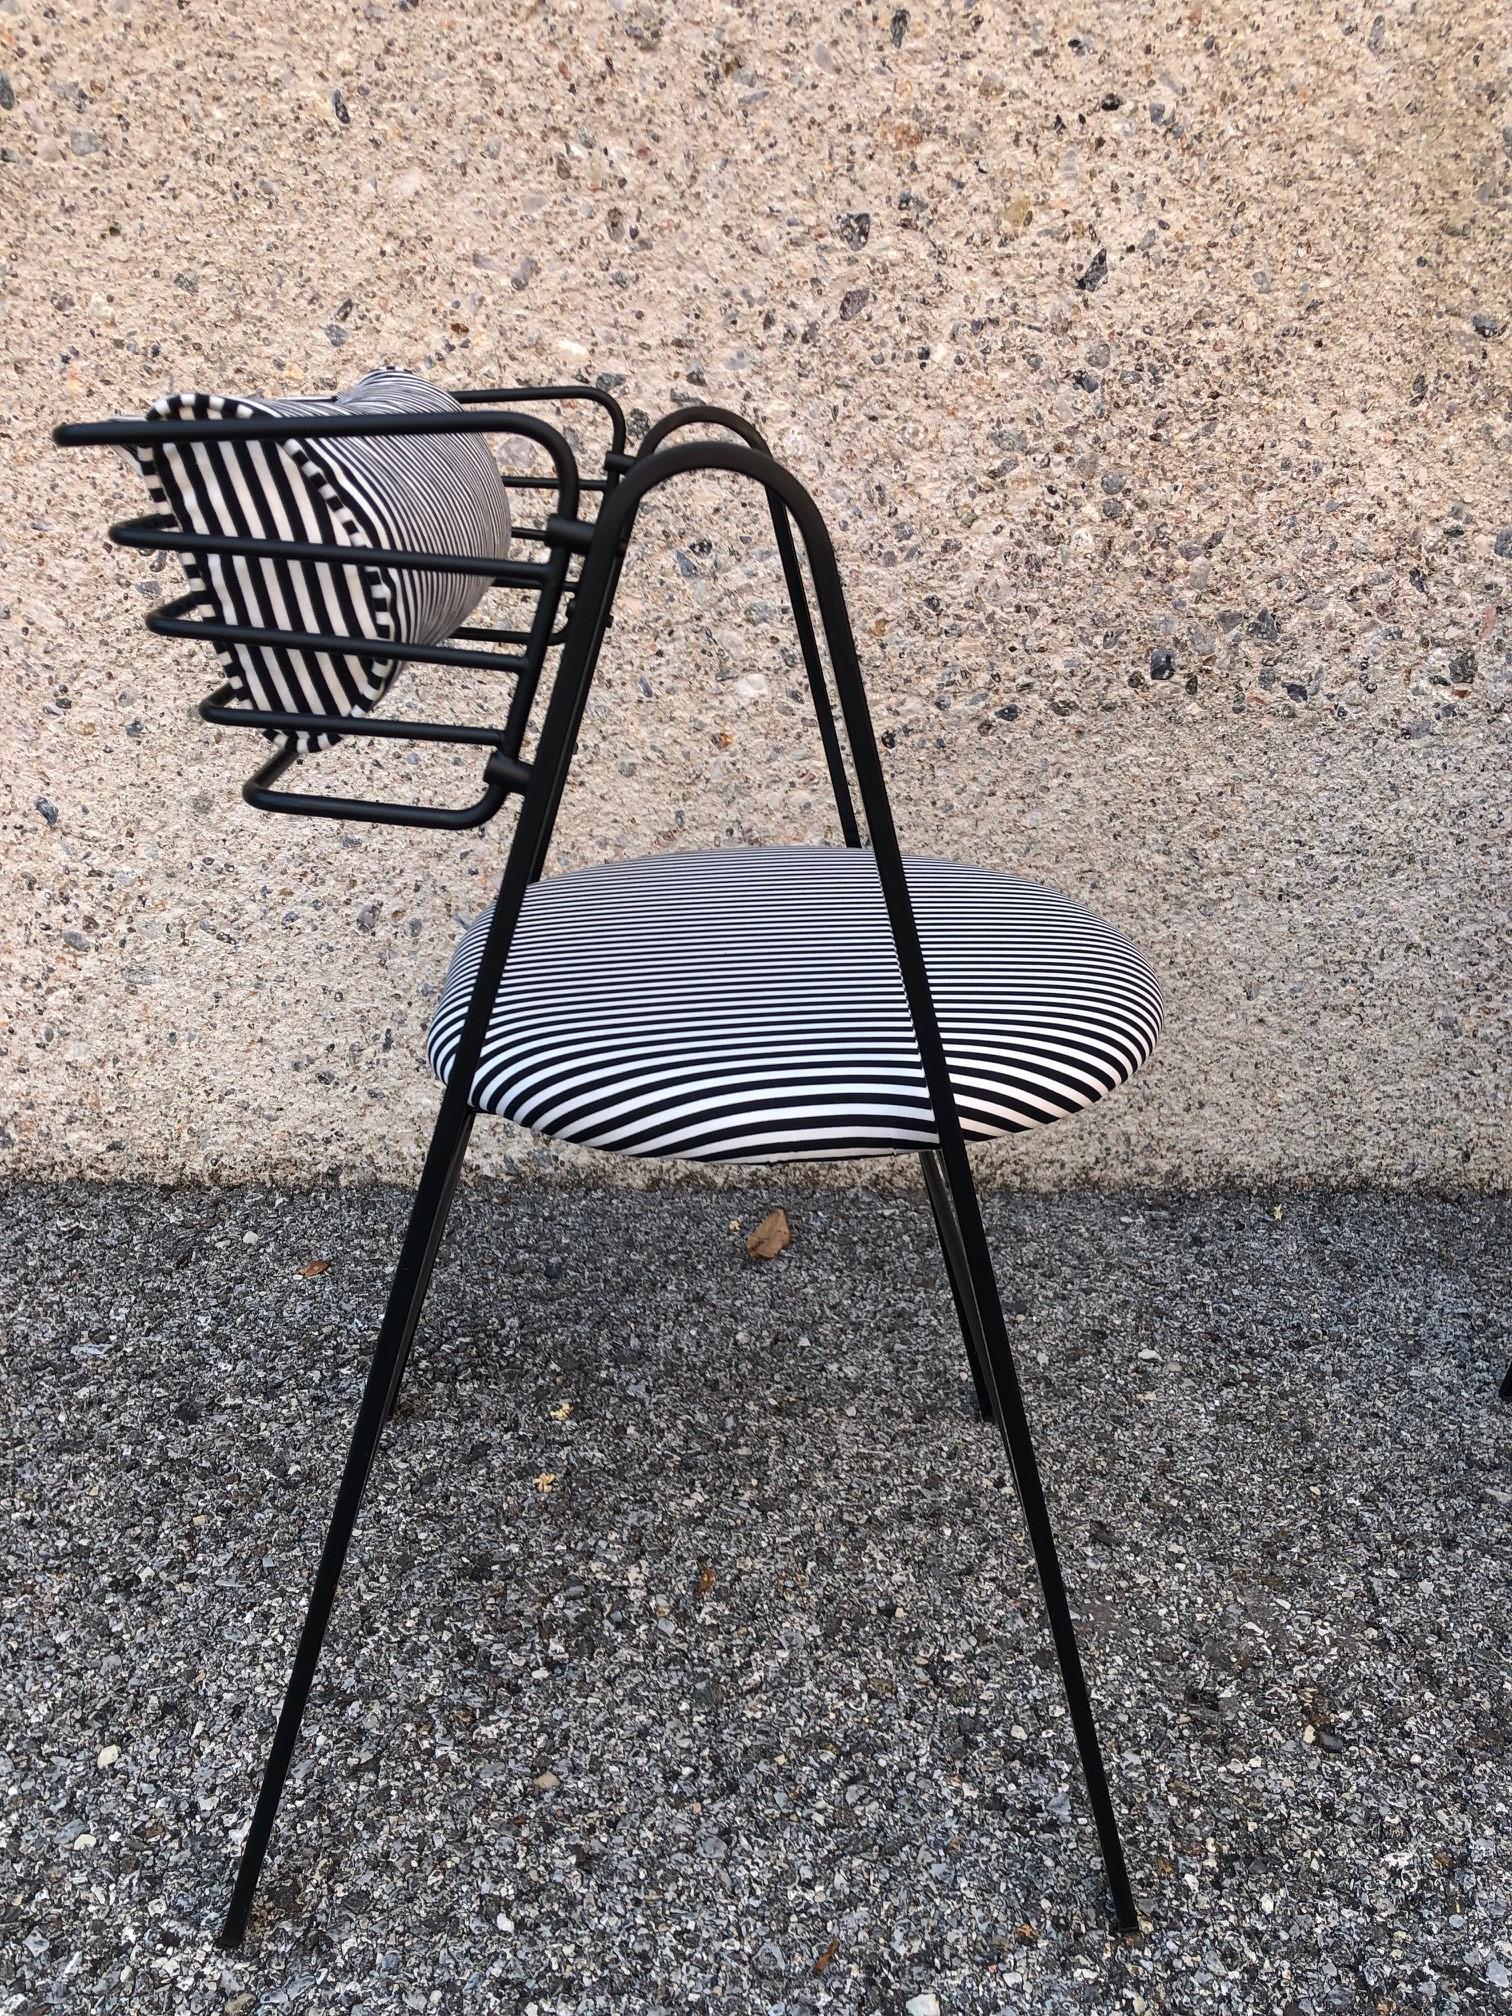 Modern Mario Botta Set of 4 Chairs, Made in Italy, 1990s Metal